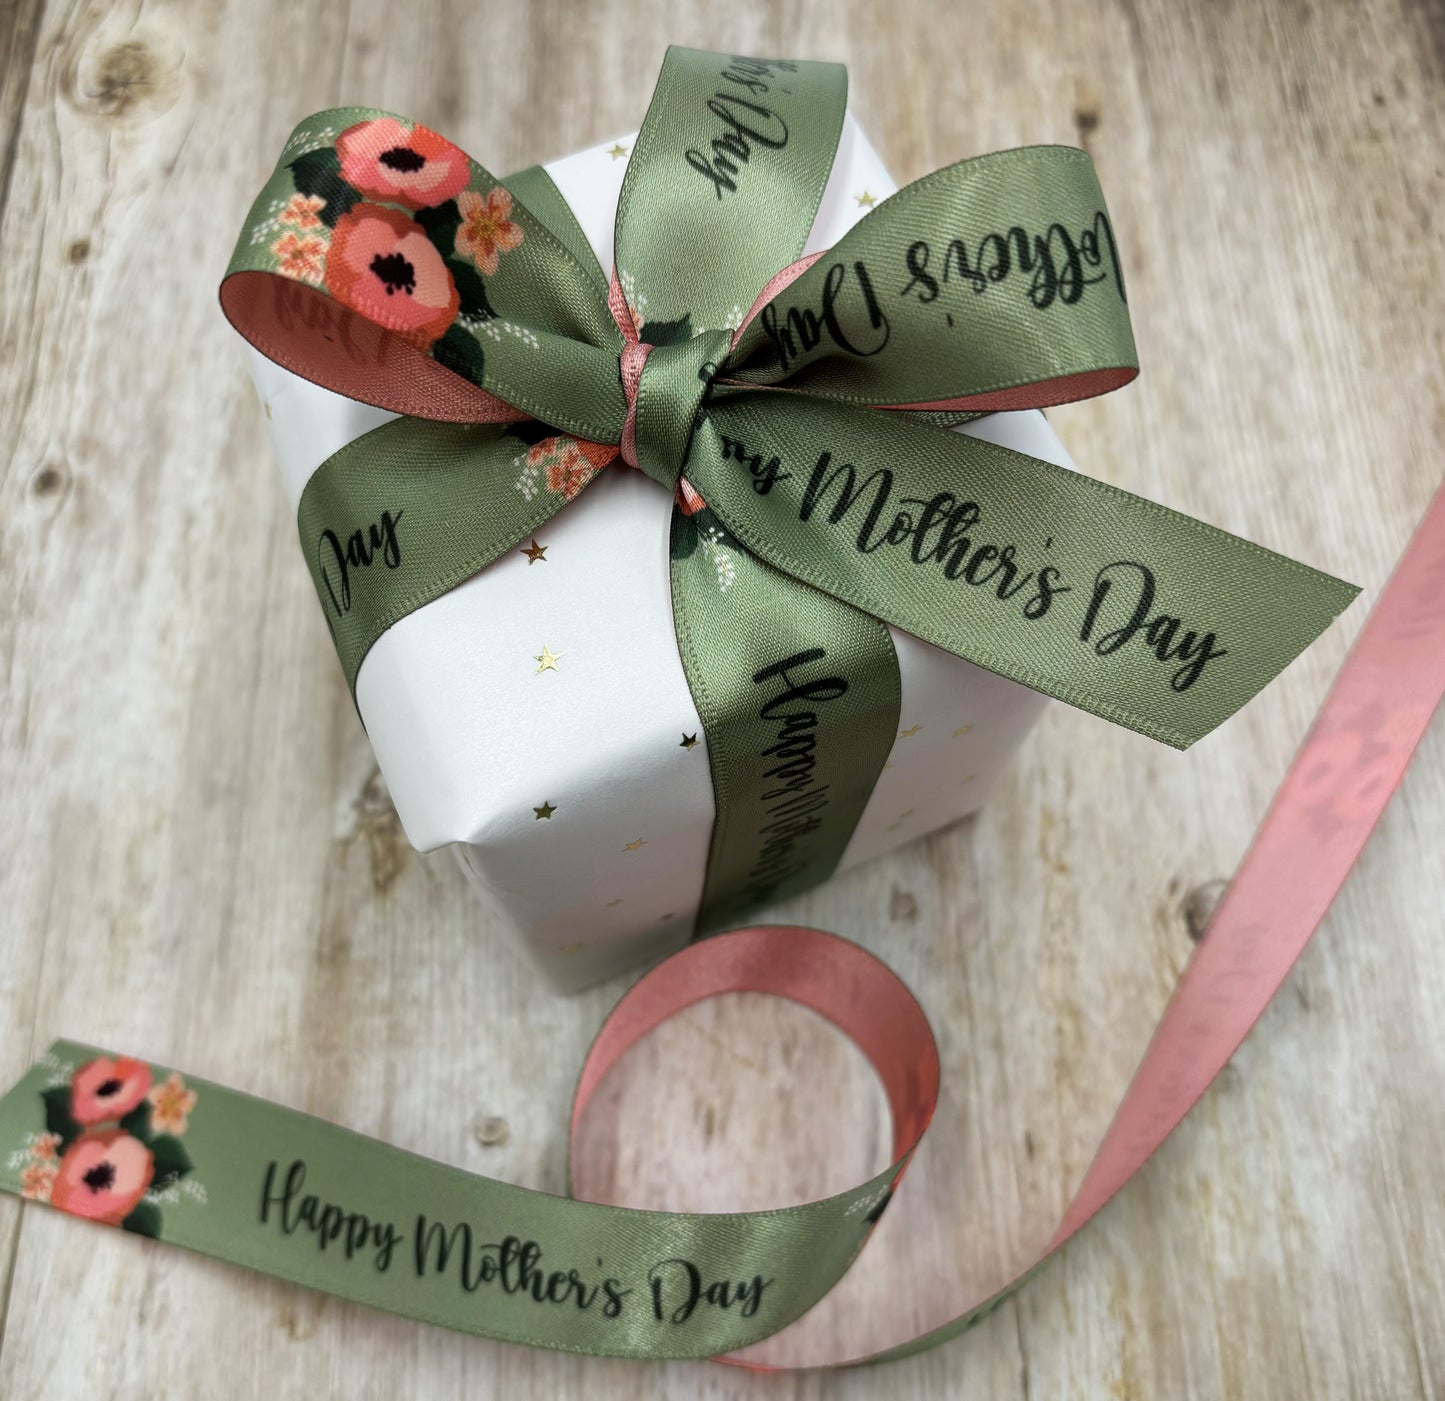 Happy Mother's Day Ribbon coral flowers with Happy Mother's Day on a sage green background and coral backing printed on 7/8" white satin